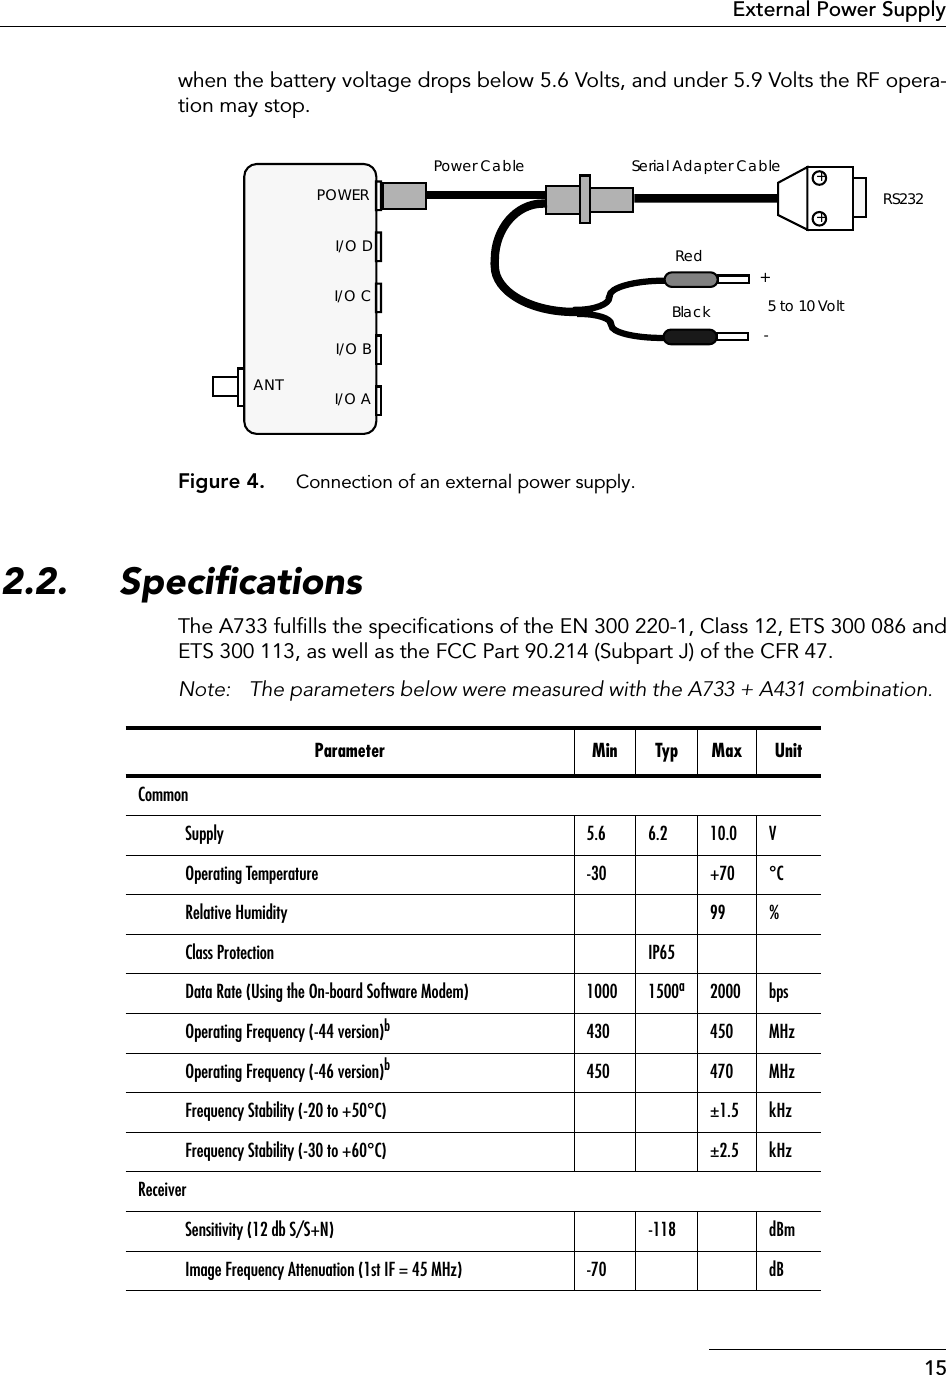  15External Power Supply when the battery voltage drops below 5.6 Volts, and under 5.9 Volts the RF opera-tion may stop. Figure 4. Connection of an external power supply. 2.2. Speciﬁcations The A733 fulﬁlls the speciﬁcations of the EN 300 220-1, Class 12, ETS 300 086 andETS 300 113, as well as the FCC Part 90.214 (Subpart J) of the CFR 47. Note: The parameters below were measured with the A733 + A431 combination. Parameter Min Typ Max Unit CommonSupply 5.6 6.2 10.0 VOperating Temperature -30 +70 °CRelative Humidity 99 %Class Protection IP65Data Rate (Using the On-board Software Modem) 1000 1500 a 2000 bpsOperating Frequency (-44 version) b 430 450 MHzOperating Frequency (-46 version) b 450 470 MHzFrequency Stability (-20 to +50°C) ±1.5 kHzFrequency Stability (-30 to +60°C) ±2.5 kHzReceiverSensitivity (12 db S/S+N) -118 dBmImage Frequency Attenuation (1st IF = 45 MHz) -70 dBPOWERI/O CI/O D+-BlackRed5 to 10 VoltRS232++Power Cable Serial Adapter CableI/O AI/O BANT